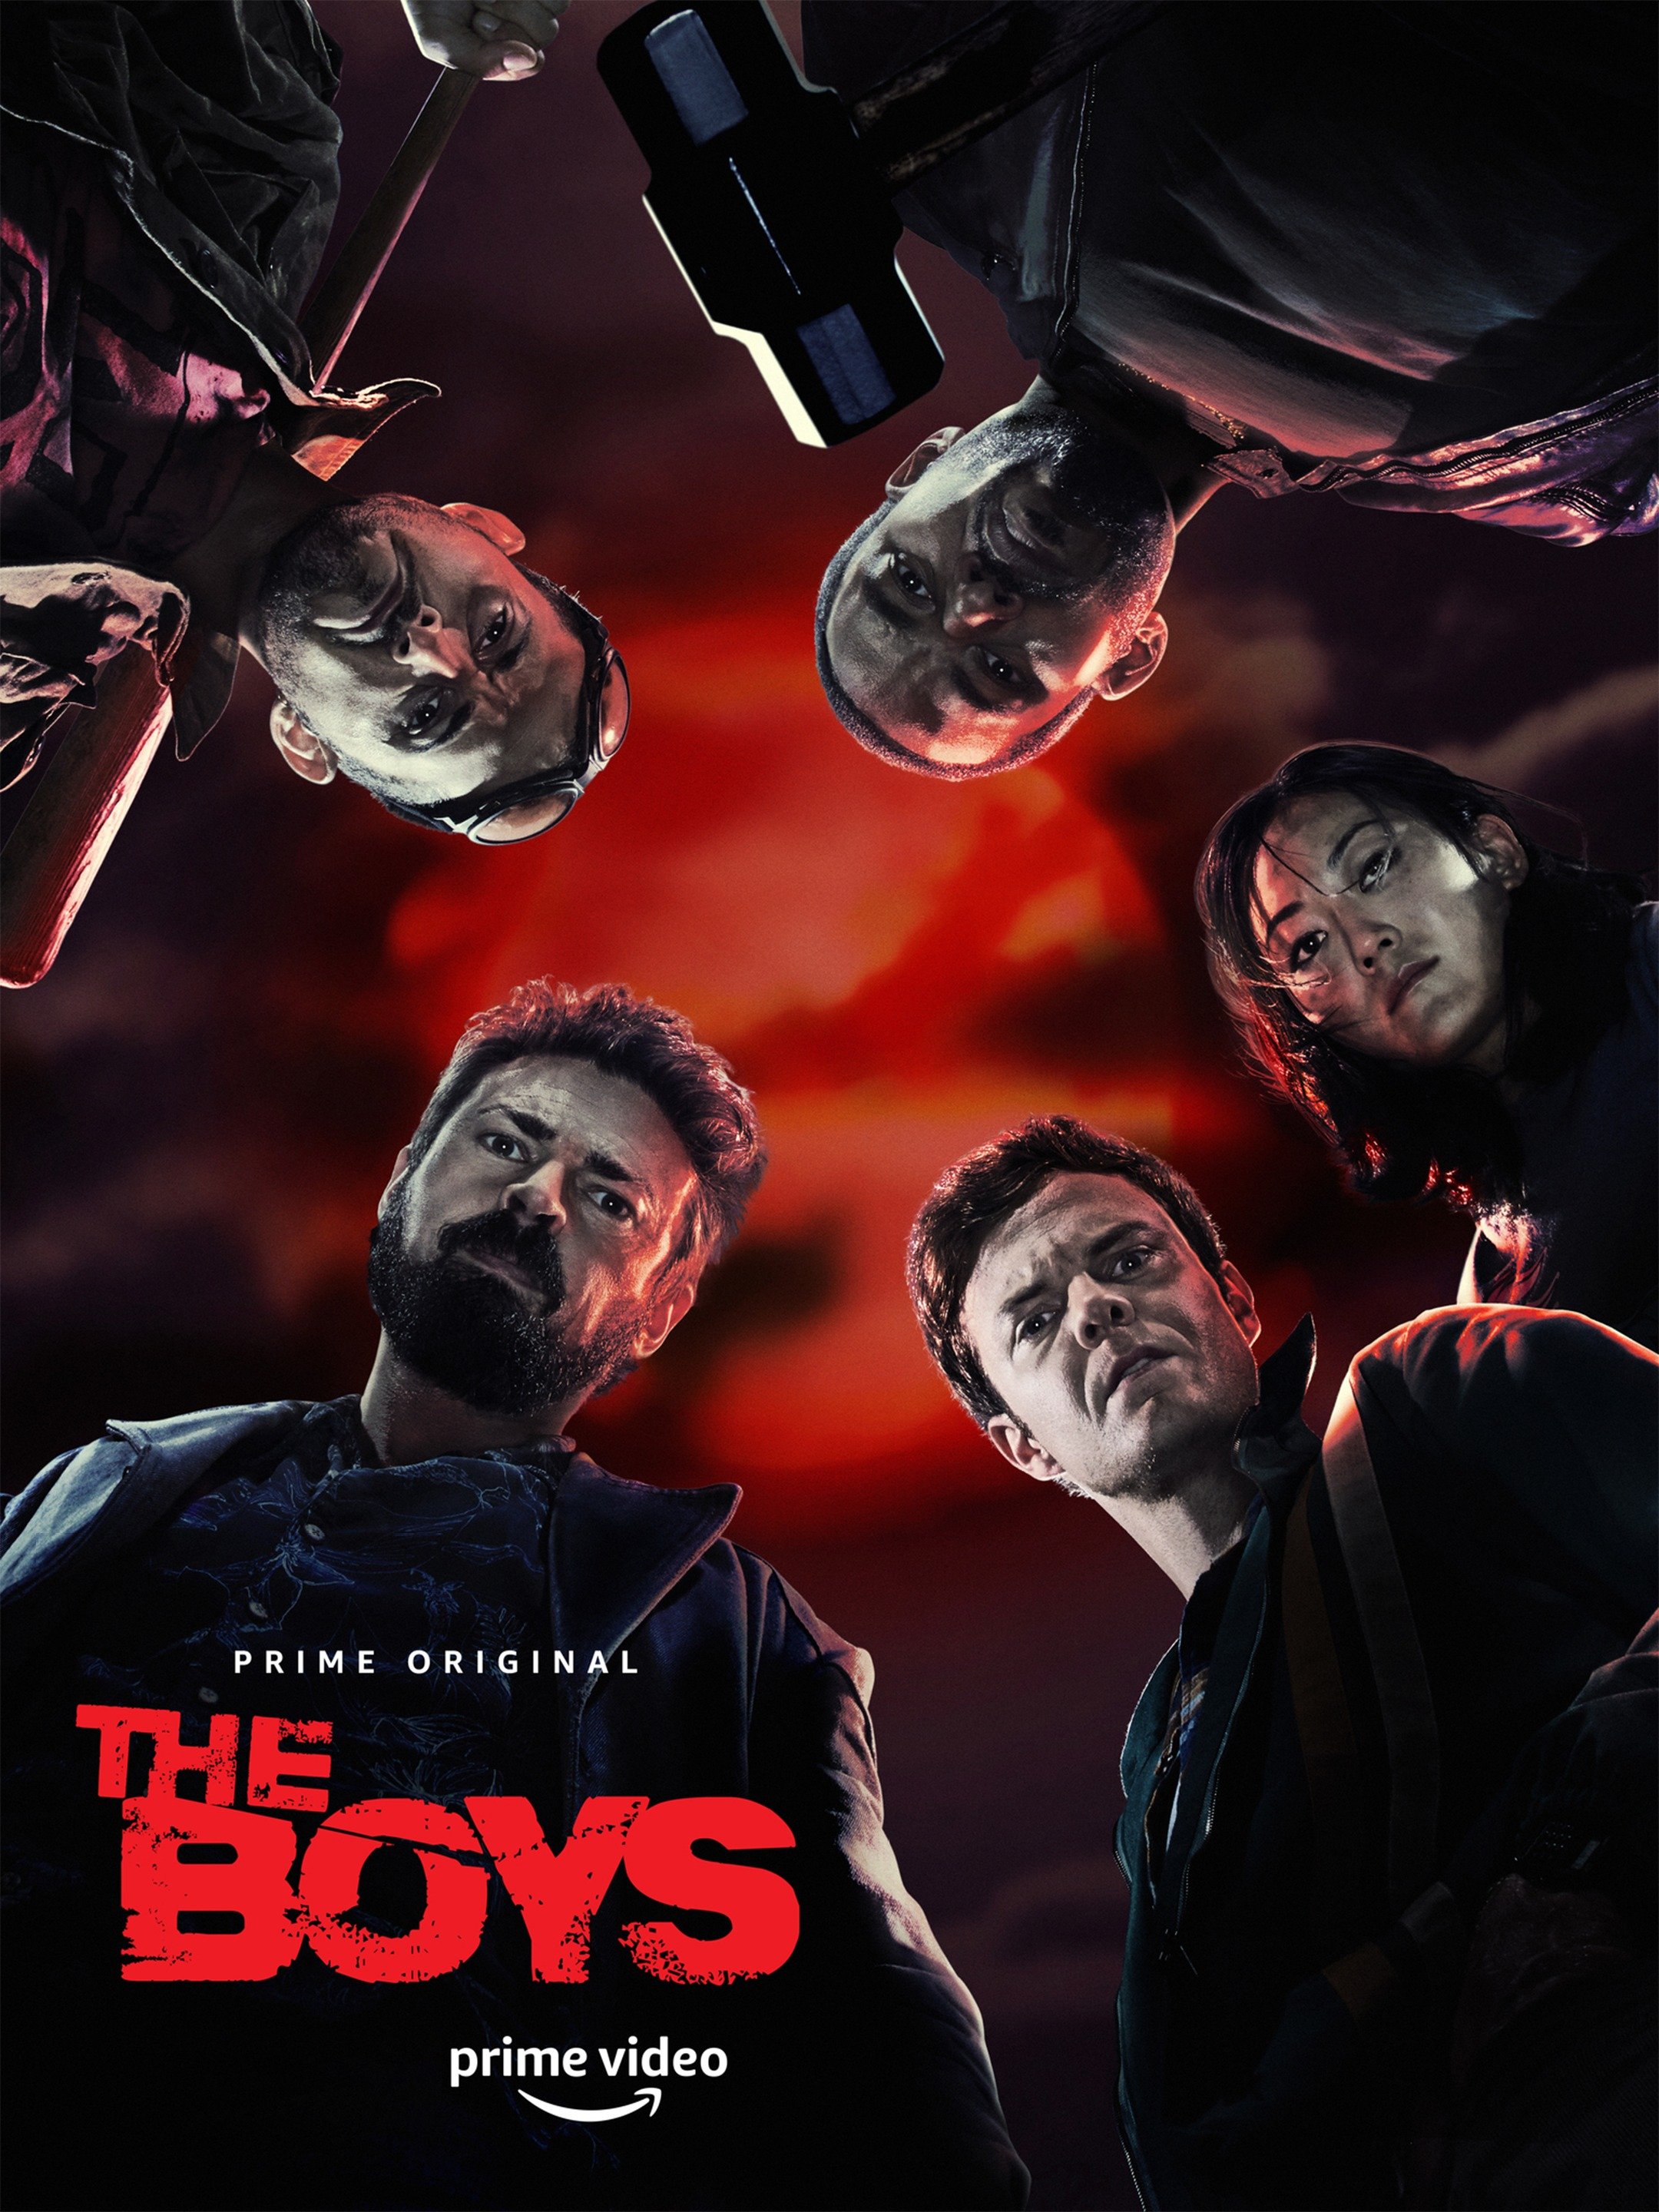 Download Film The Guys